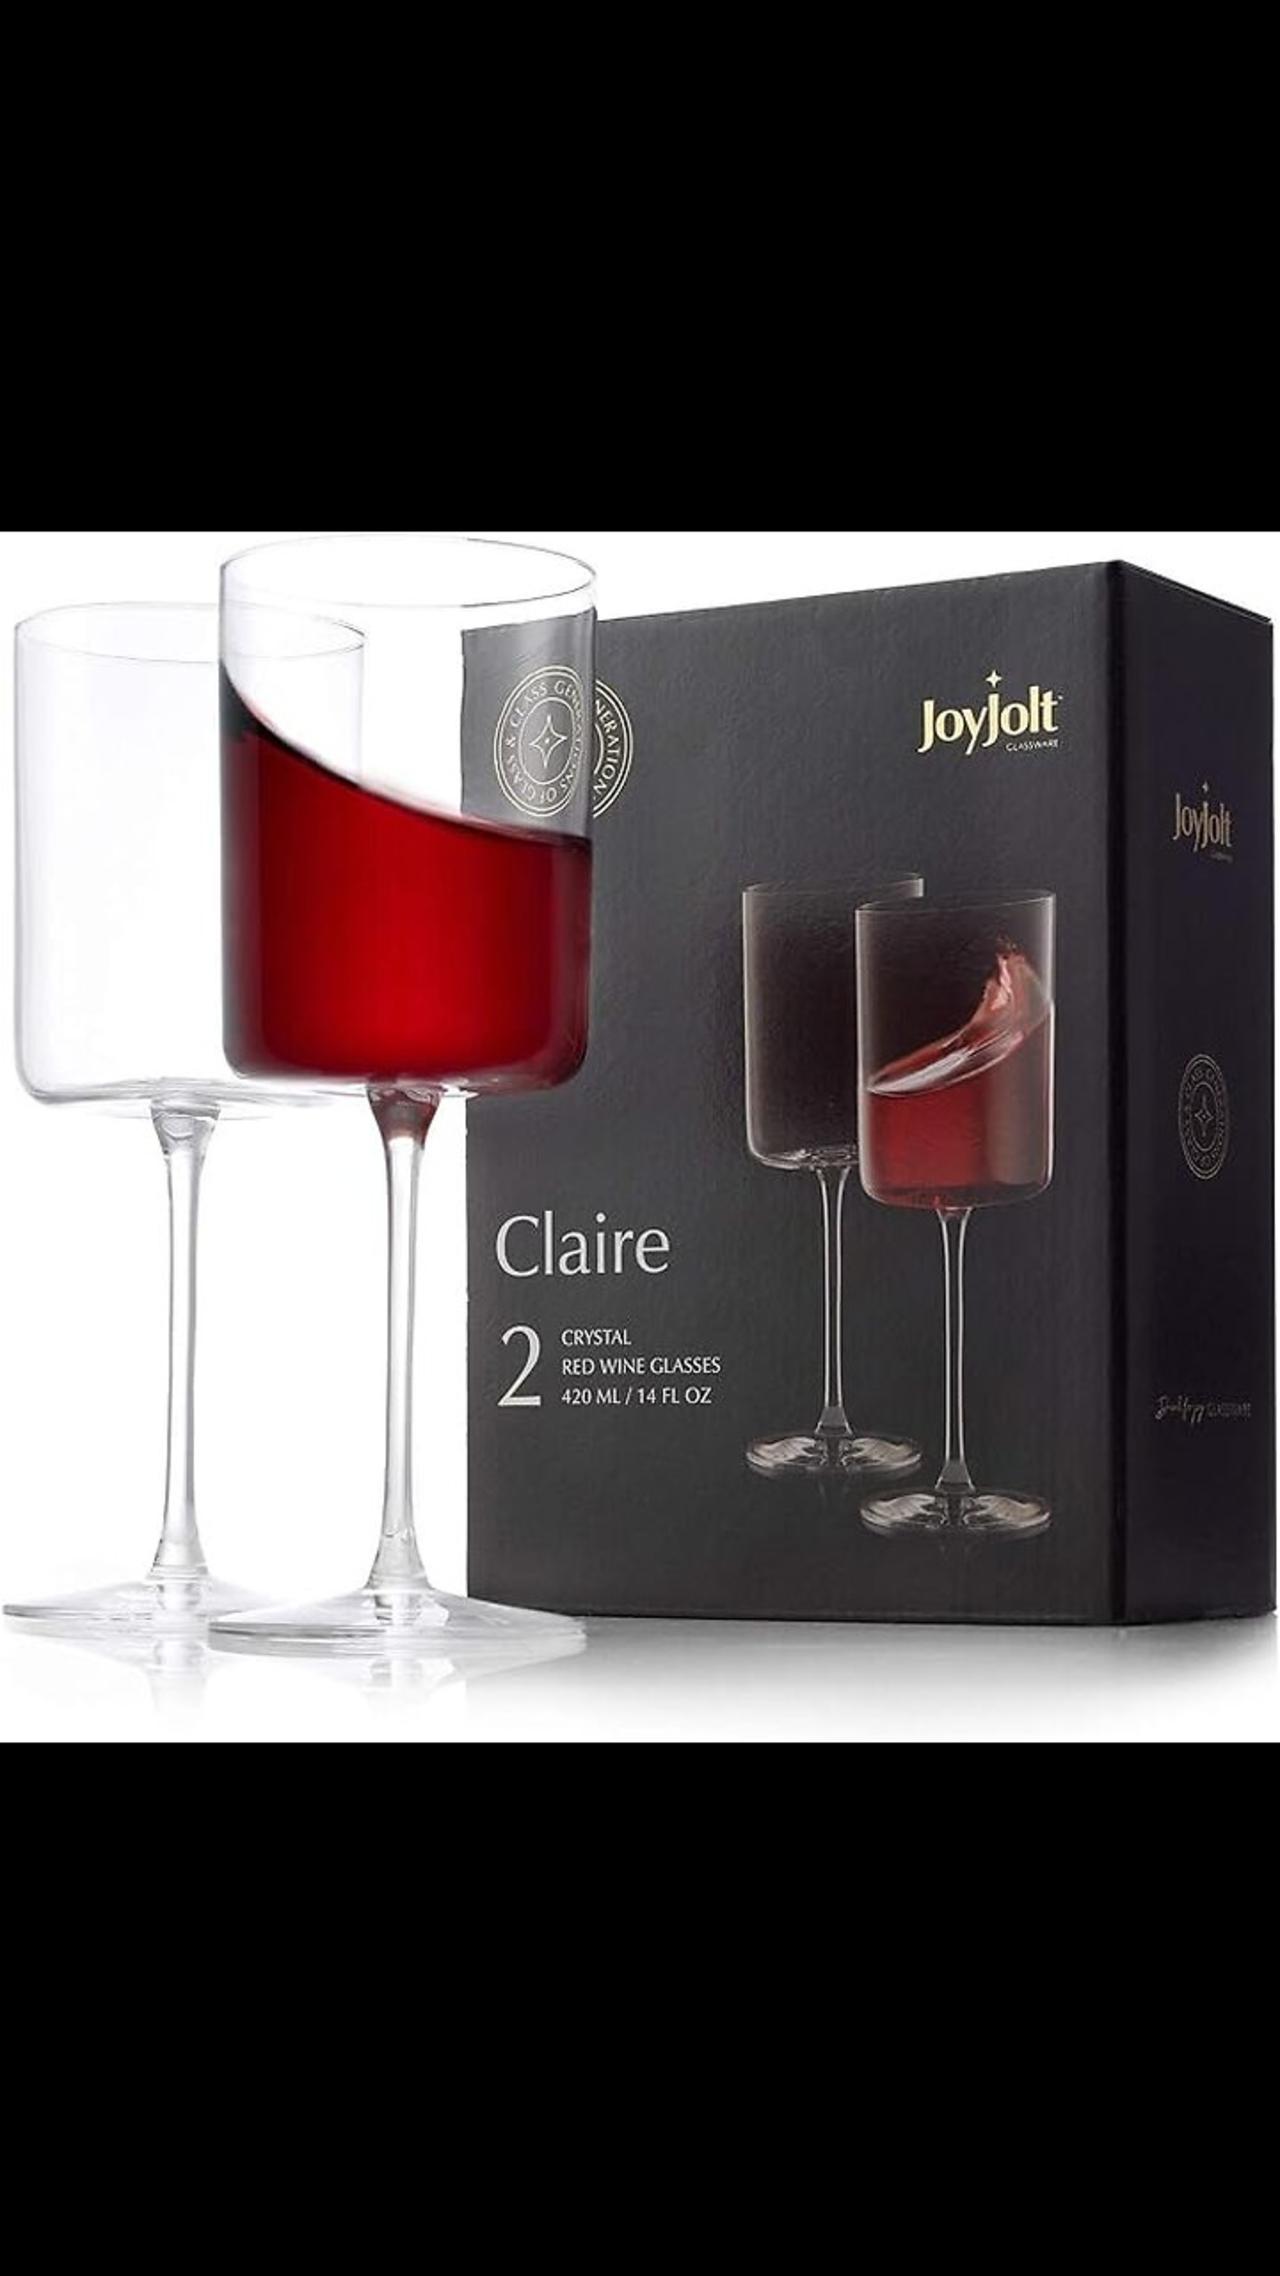 GET -58% DISCOUNT JOYJOLT CLAIRE 14OZ RED WINE GLASS SET ONLY ON AMAZON